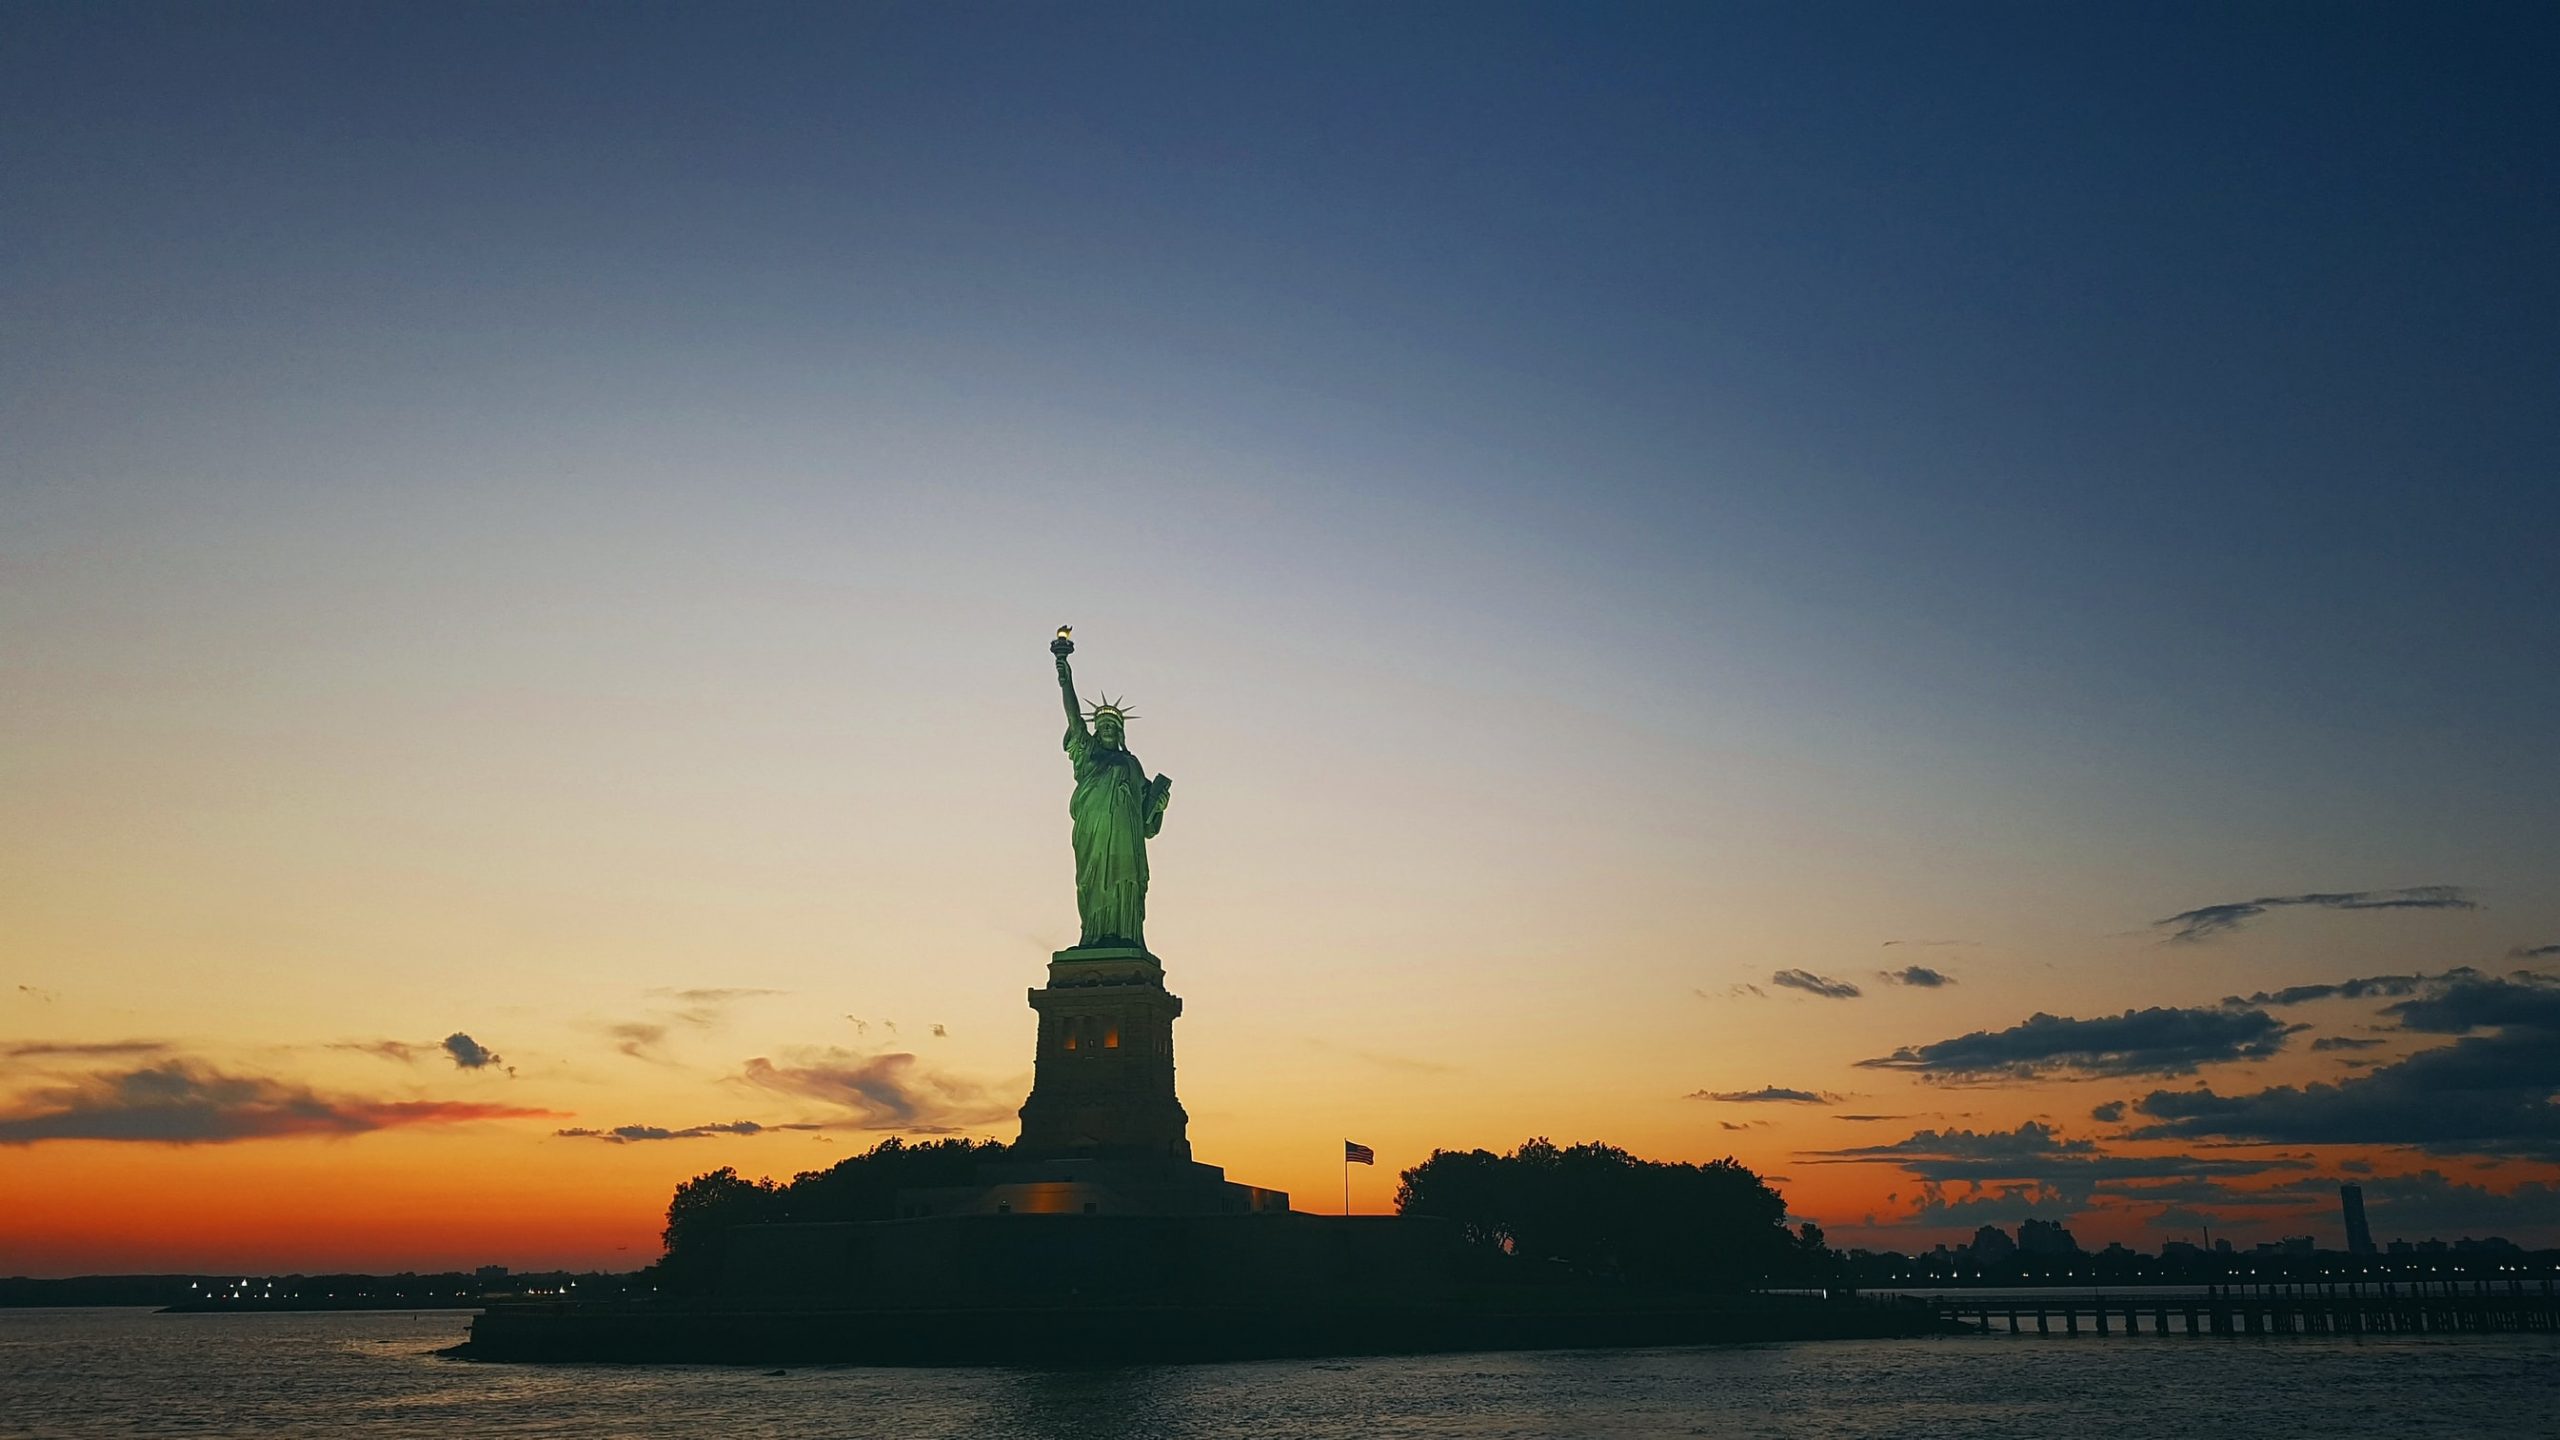 fun facts about the Statue of Liberty